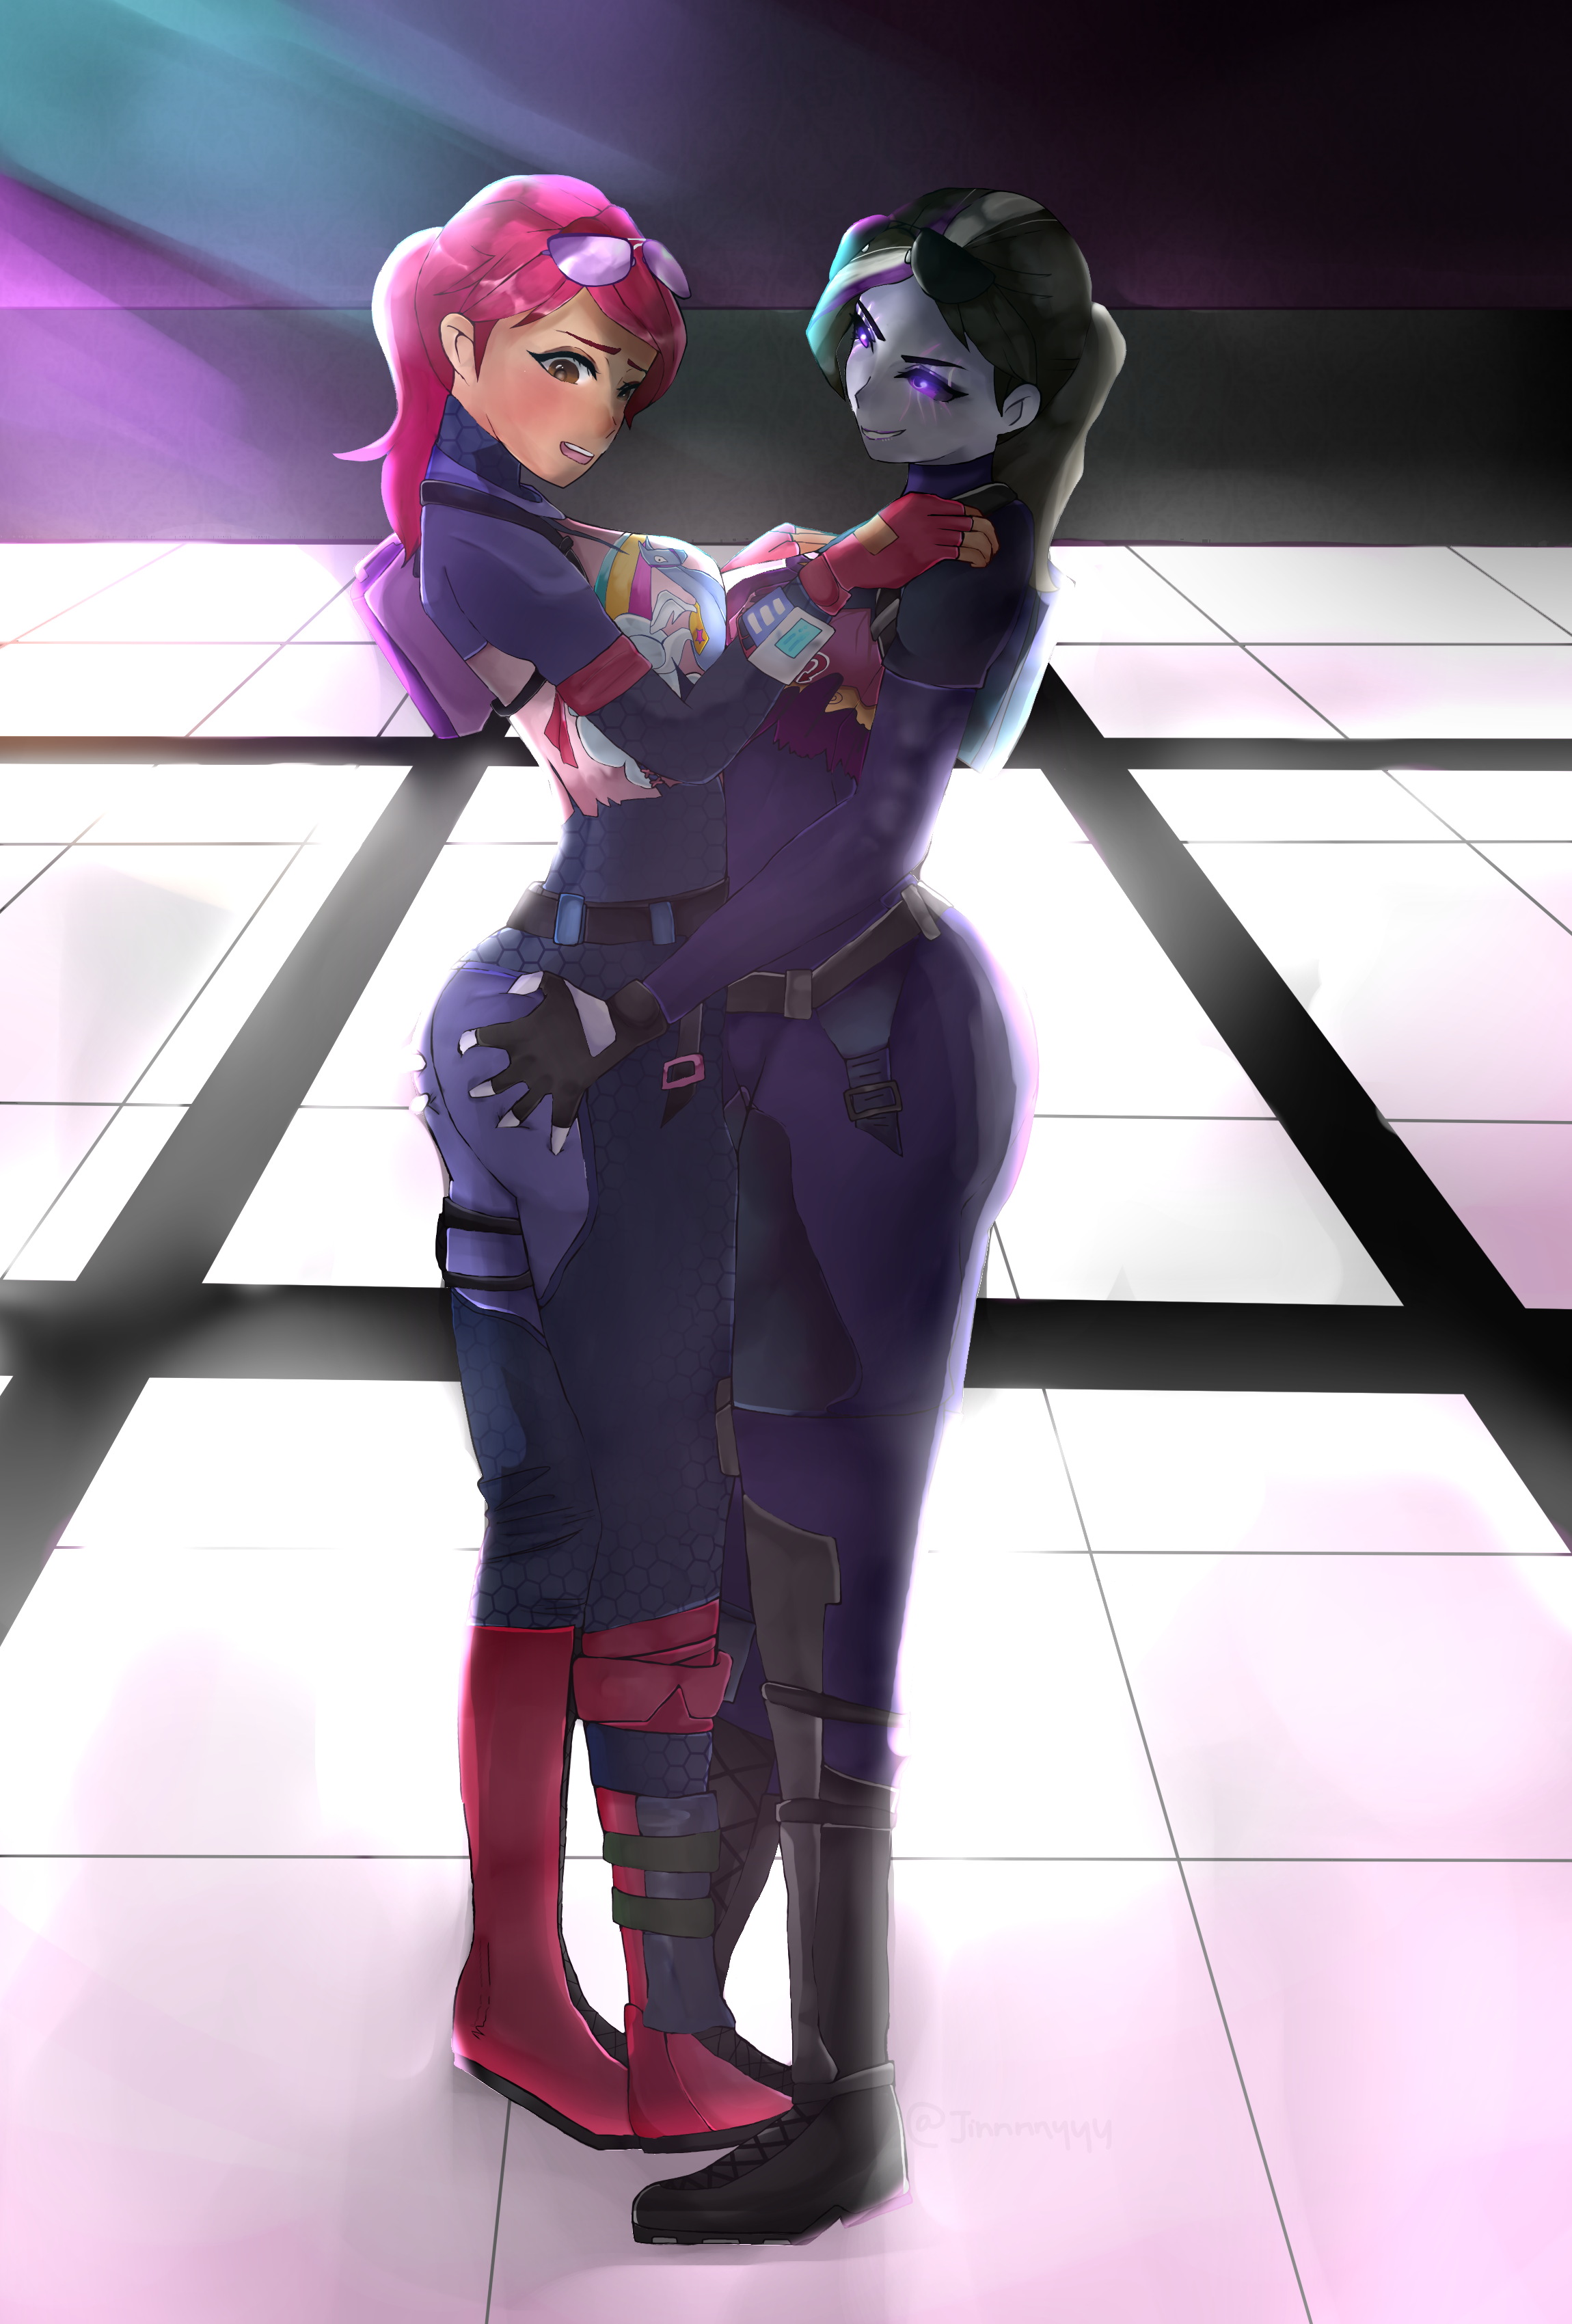 Brite and Dark Bomber finished